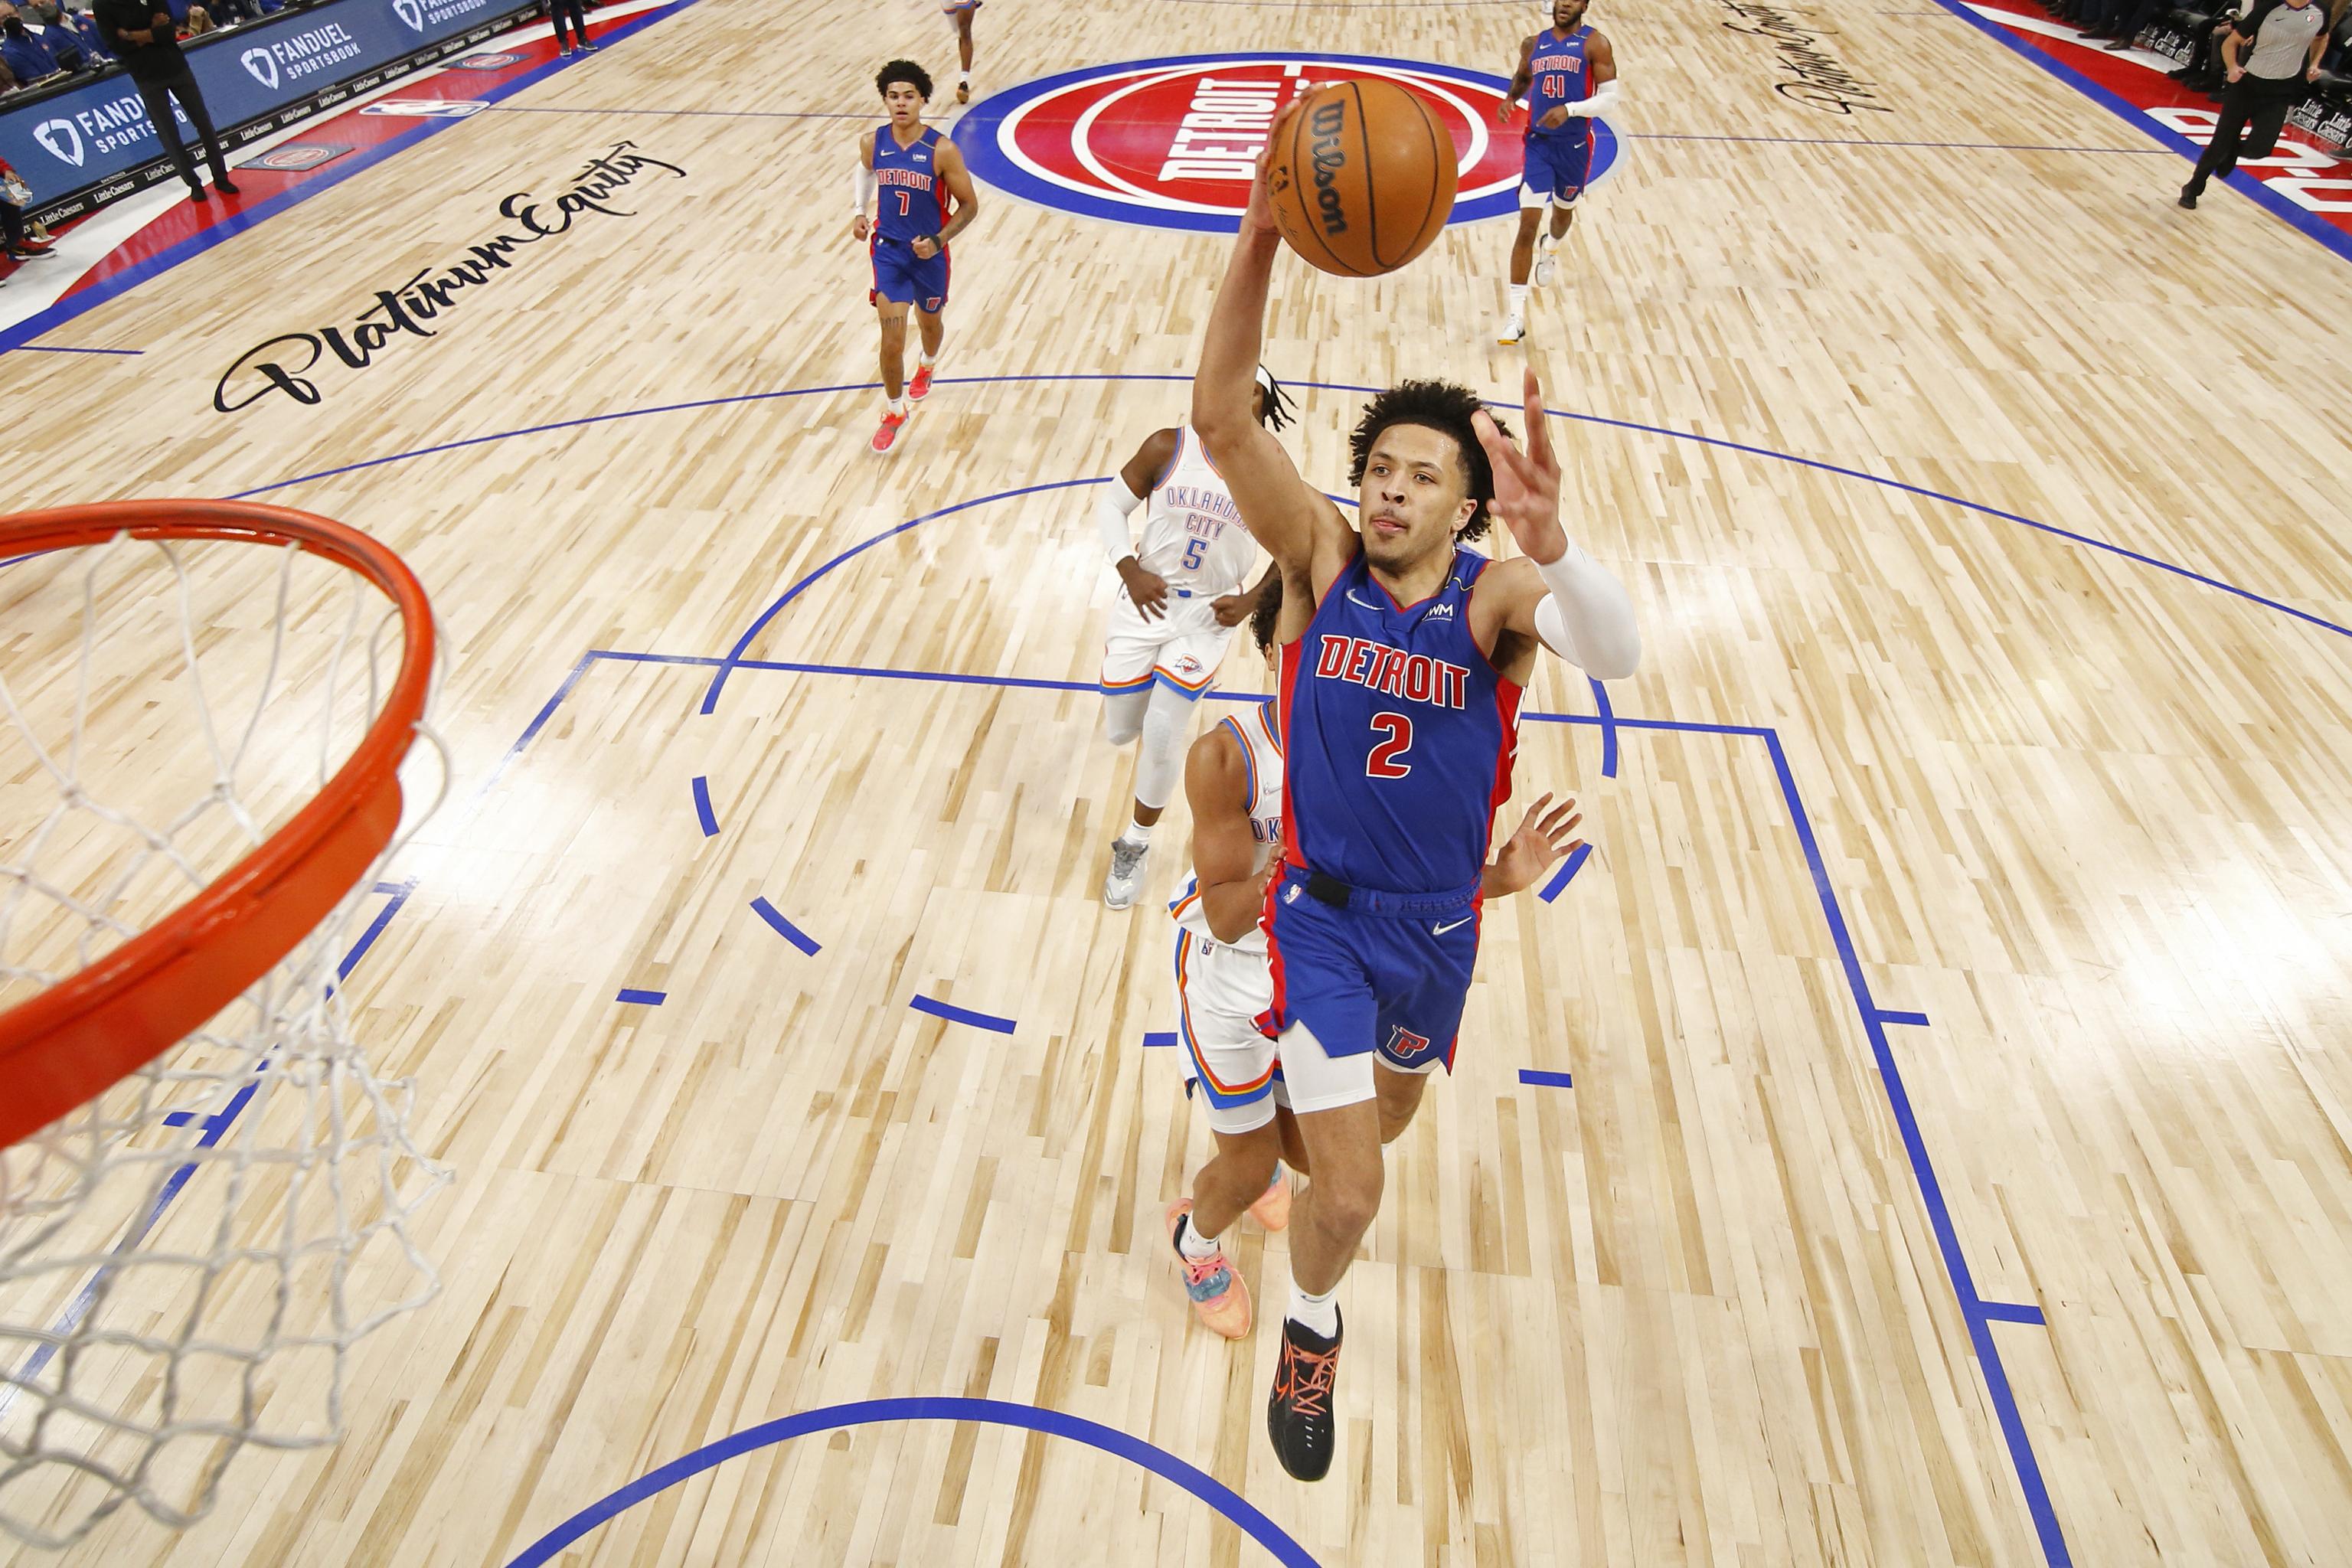 Cade Cunningham rocks the rim in 18-point game [HIGHLIGHTS]